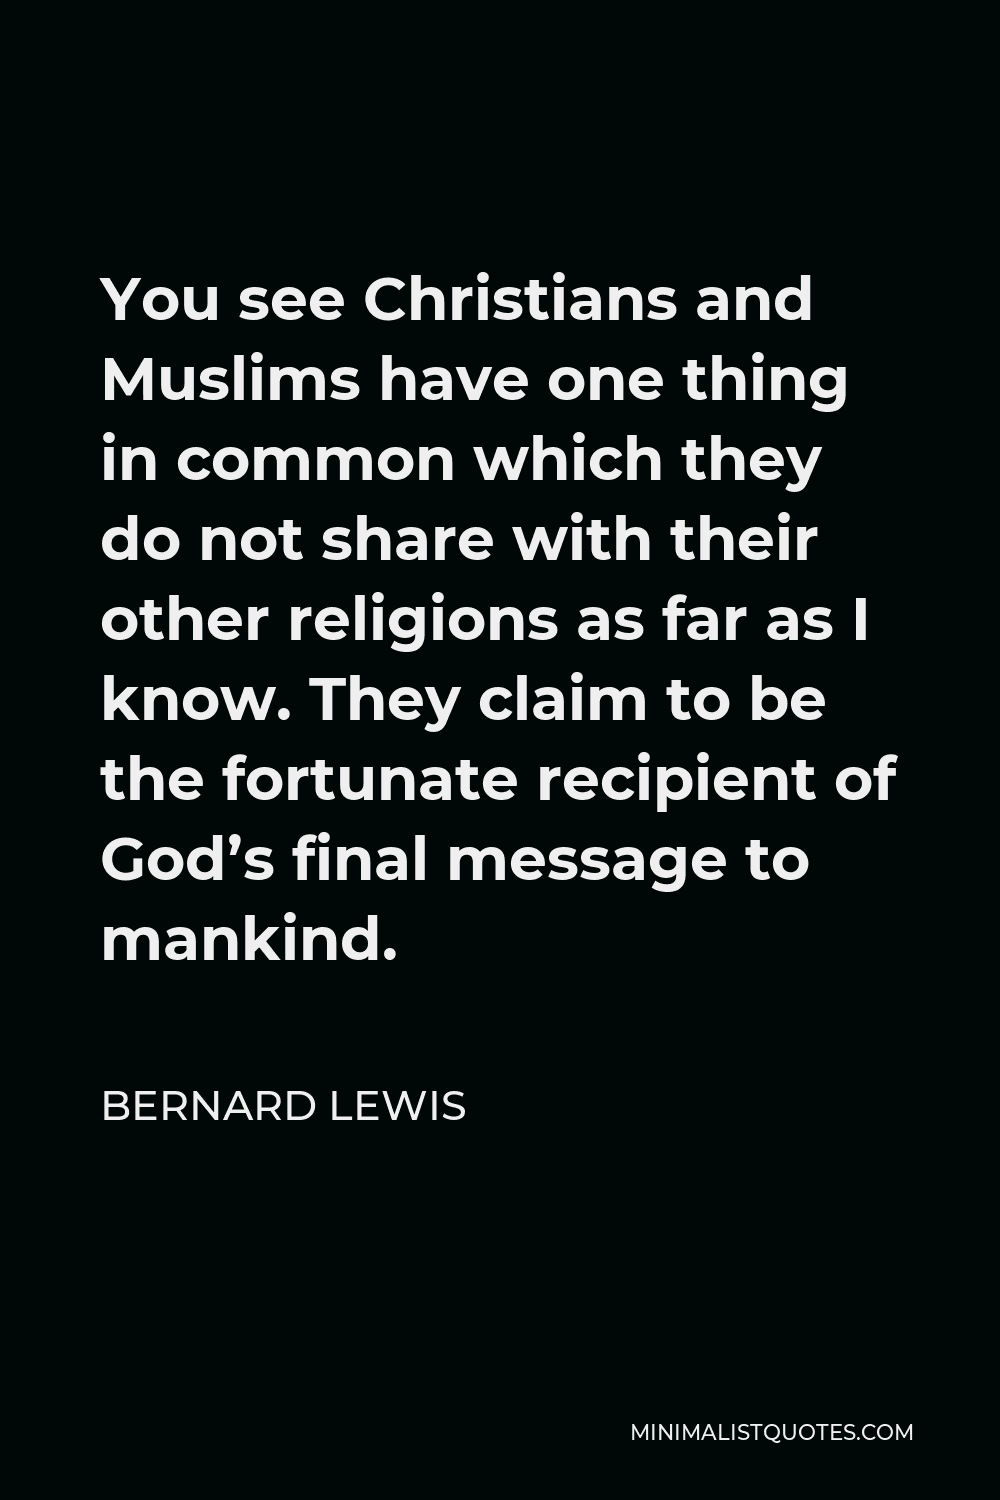 Bernard Lewis Quote - You see Christians and Muslims have one thing in common which they do not share with their other religions as far as I know. They claim to be the fortunate recipient of God’s final message to mankind.